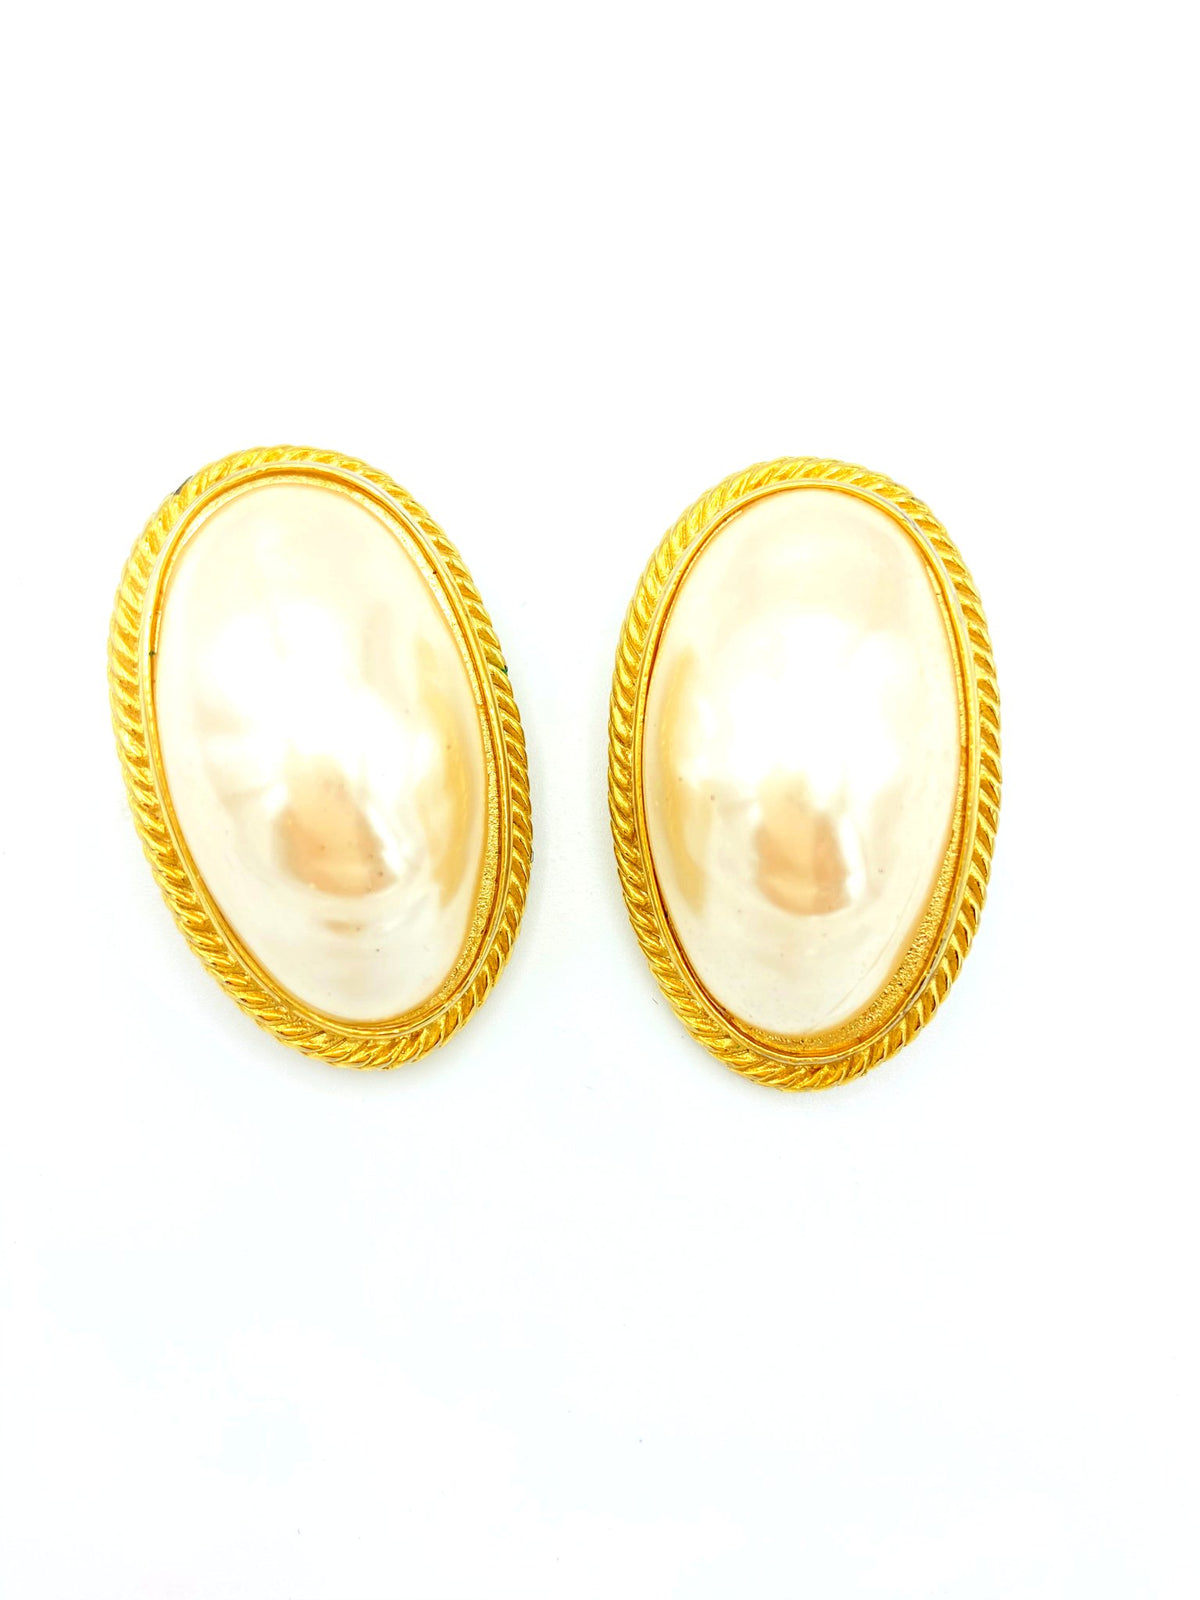 Givenchy Large Gold Mobe Baroque Pearl Vintage Clip-On Earrings - 24 Wishes Vintage Jewelry